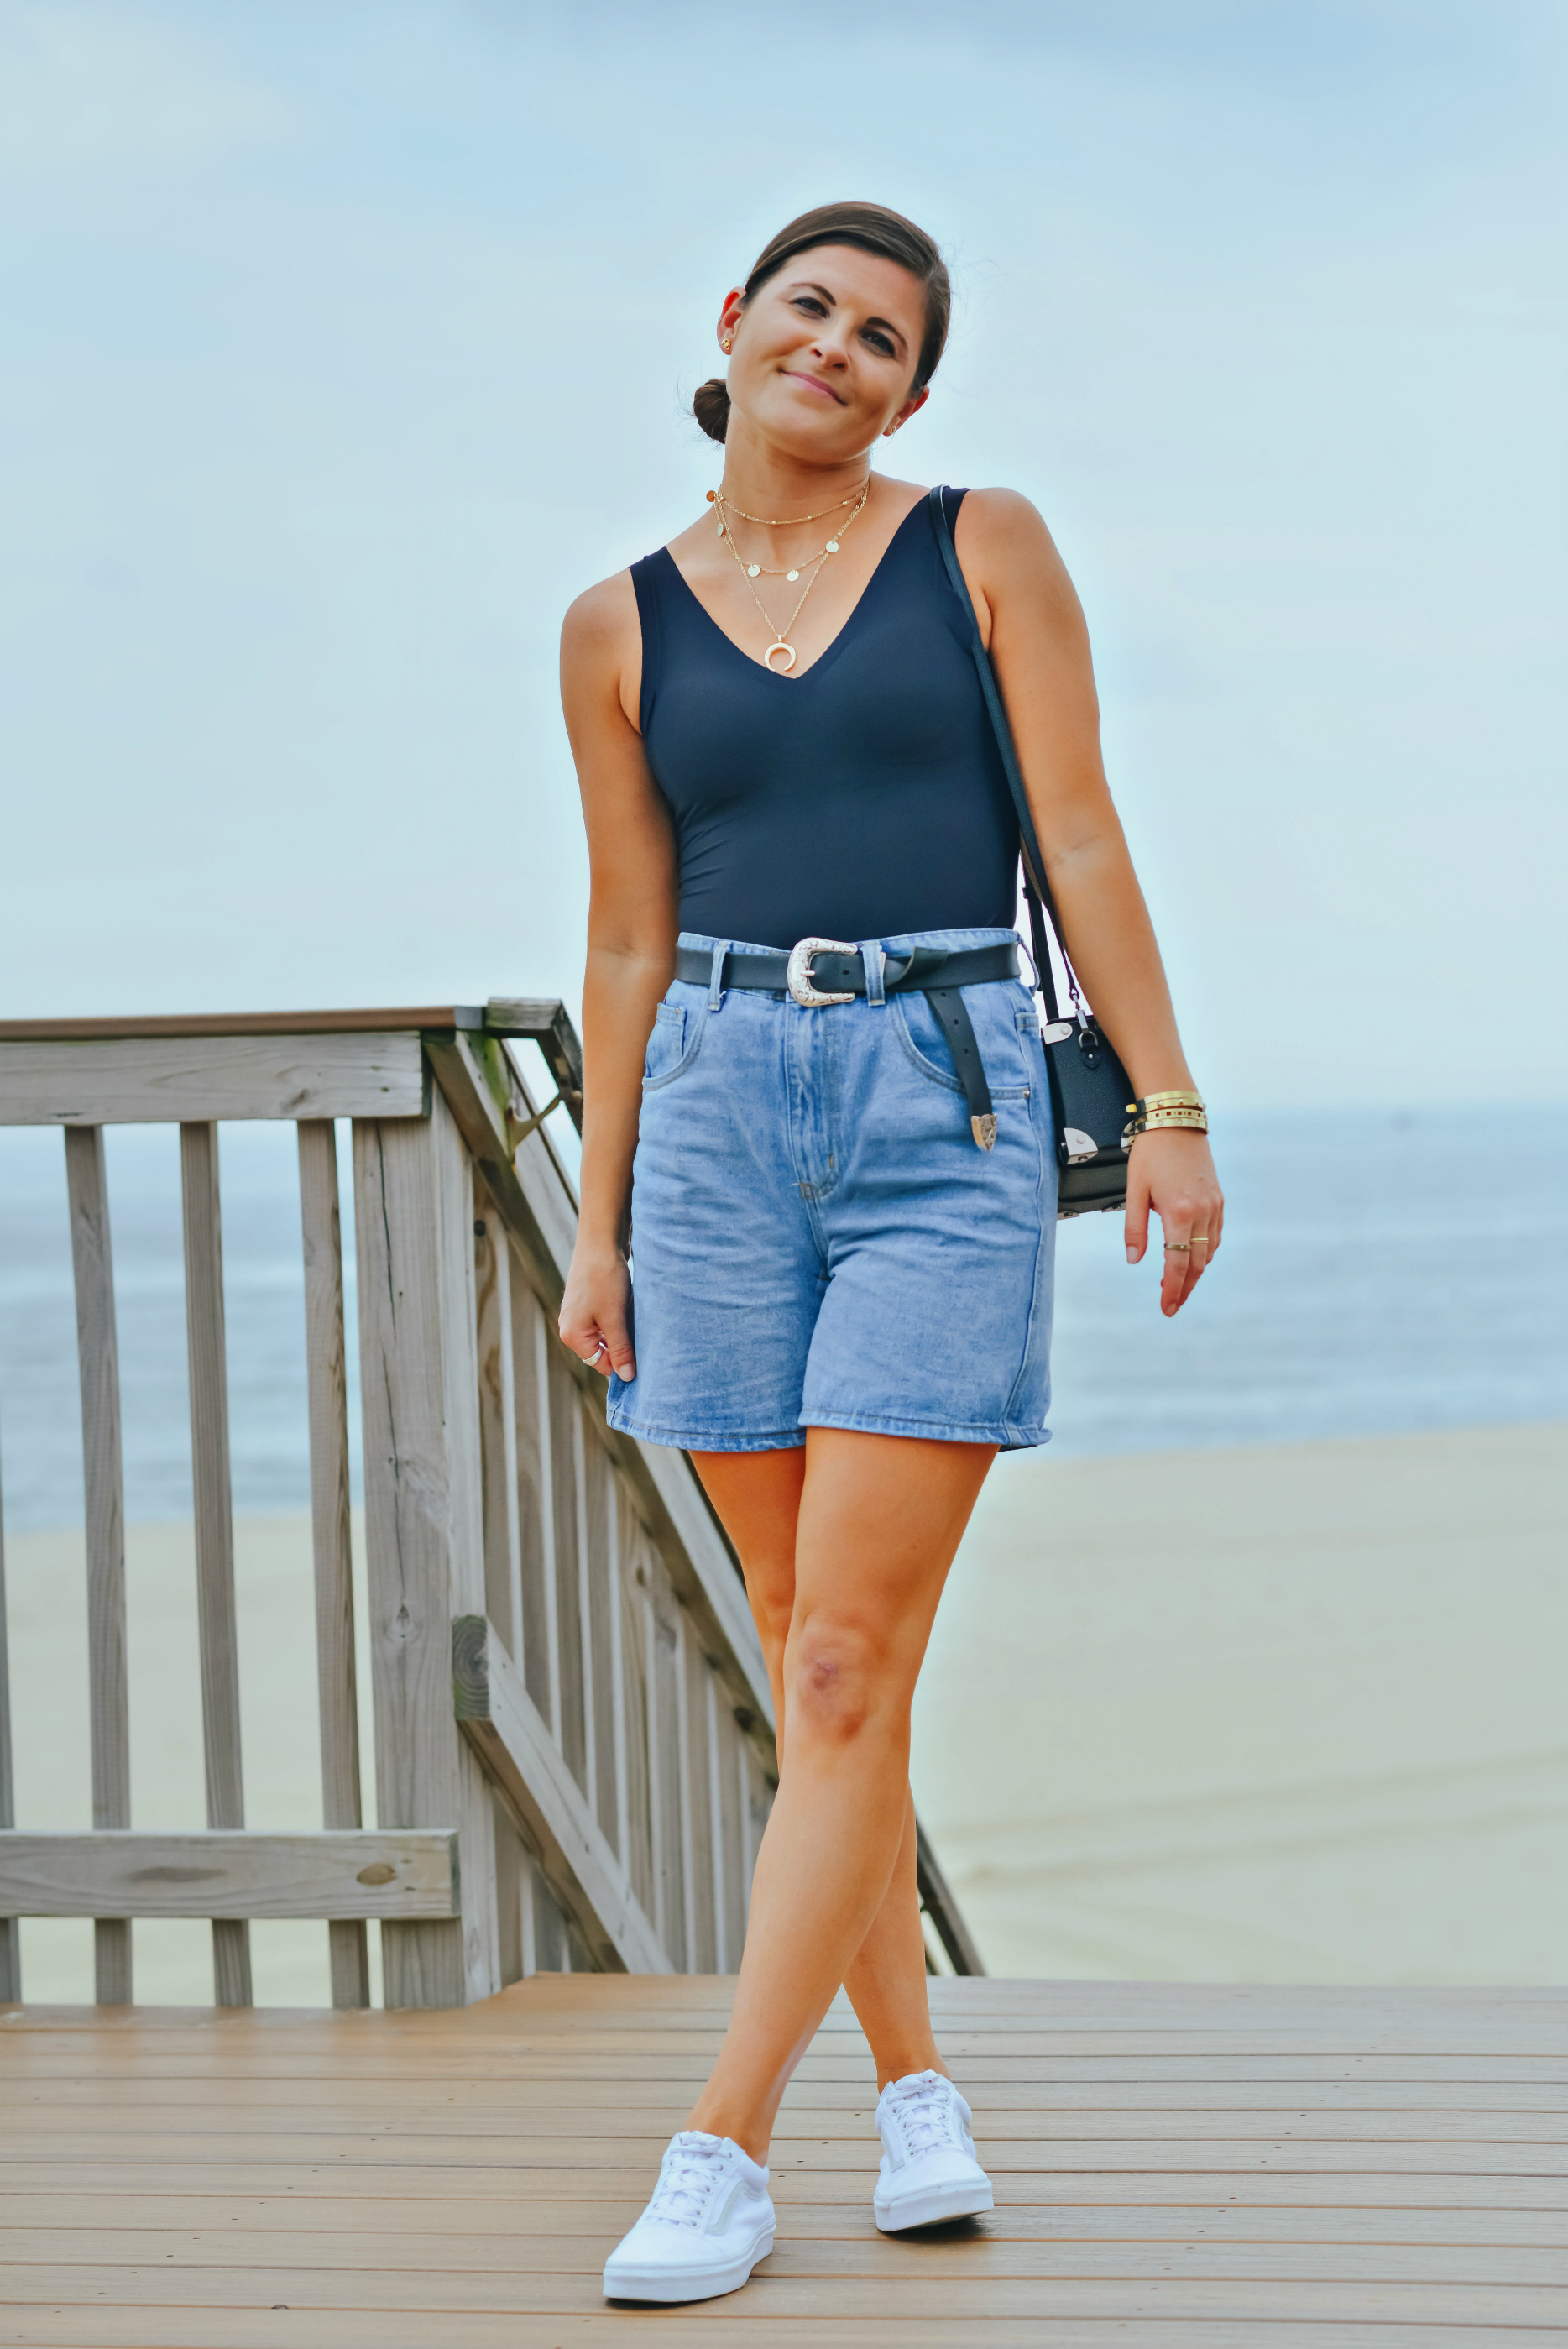 PrettyLittleThing High Waisted Mom Jean Denim Shorts, Dorina Black Seamless Bodysuit, Vans Classic Old Skool Triple White Sneakers, Denim Shorts Outfit, How to Wear Denim Shorts as an Adult, Tilden of To Be Bright